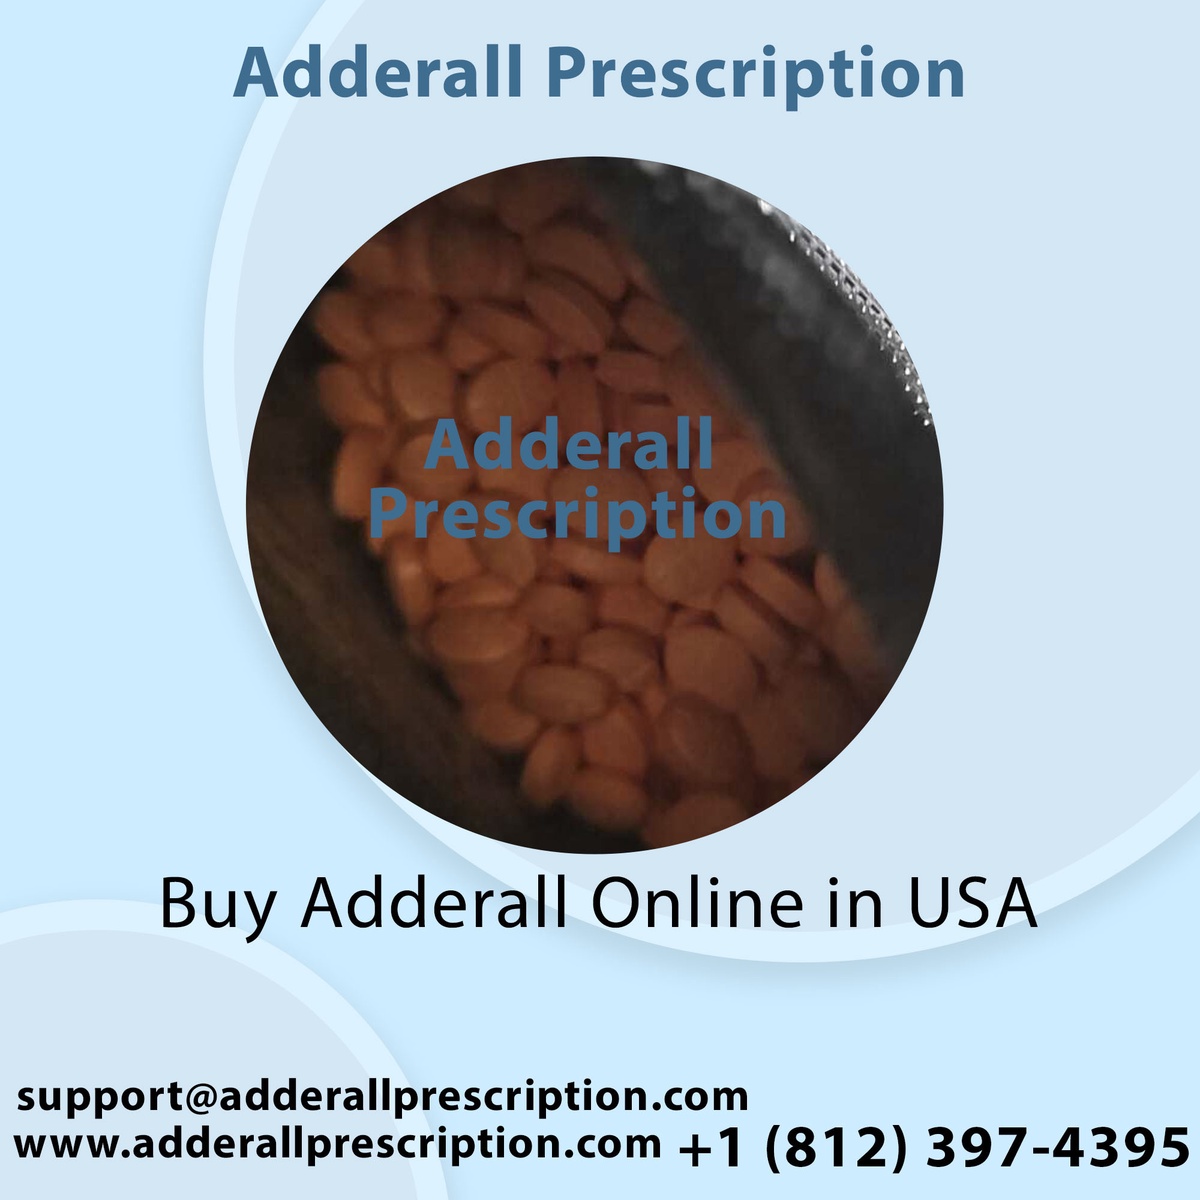 Buy Adderall Online in USA: A Comprehensive Guide